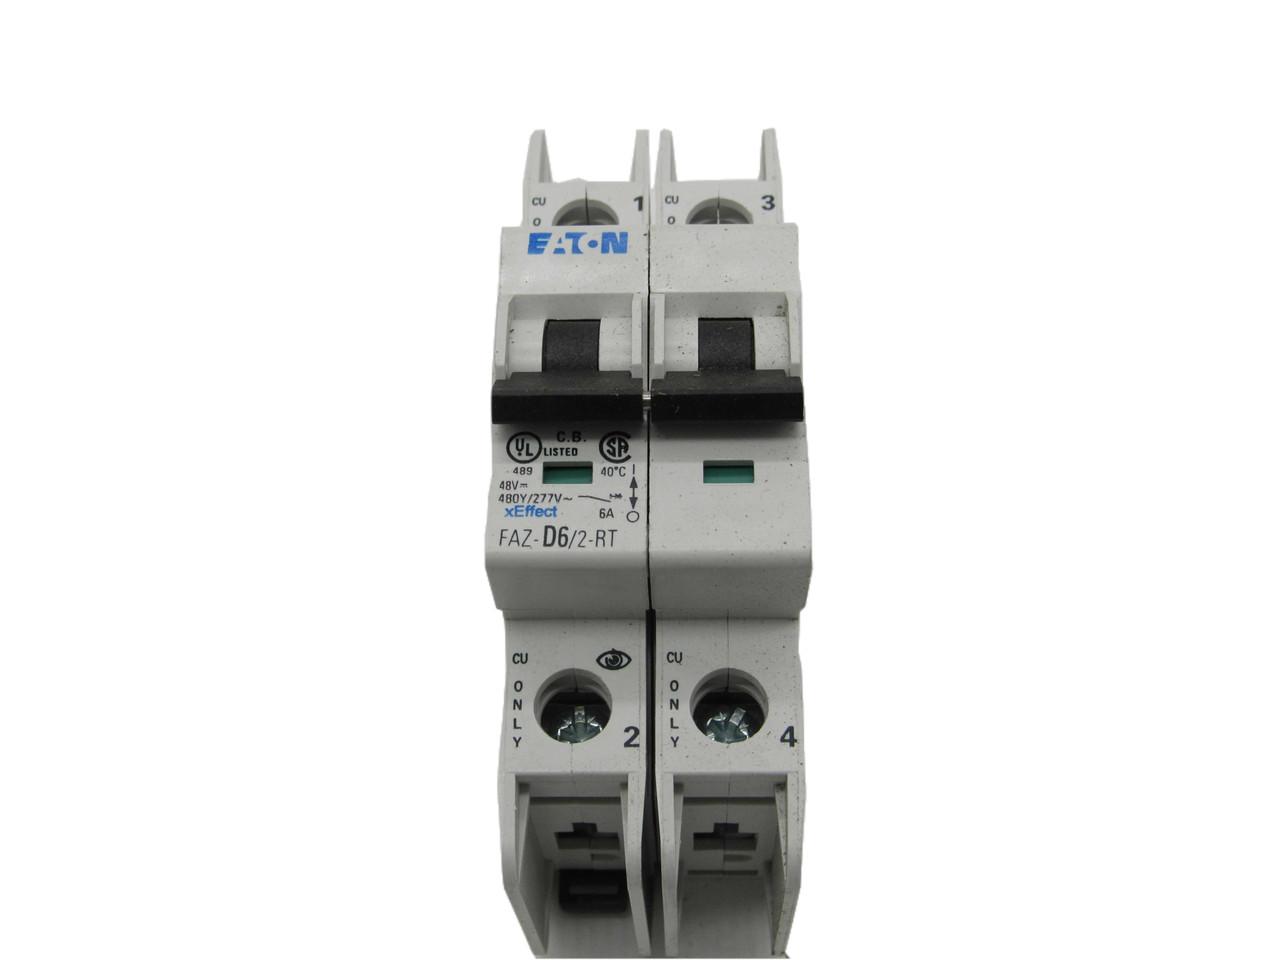 Eaton FAZ-D6/2-RT 277/480 VAC 50/60 Hz, 6 A, 2-Pole, 10/14 kA, 10 to 20 x Rated Current, Ring Tongue Terminal, DIN Rail Mount, Standard Packaging, D-Curve, Current Limiting, Thermal Magnetic